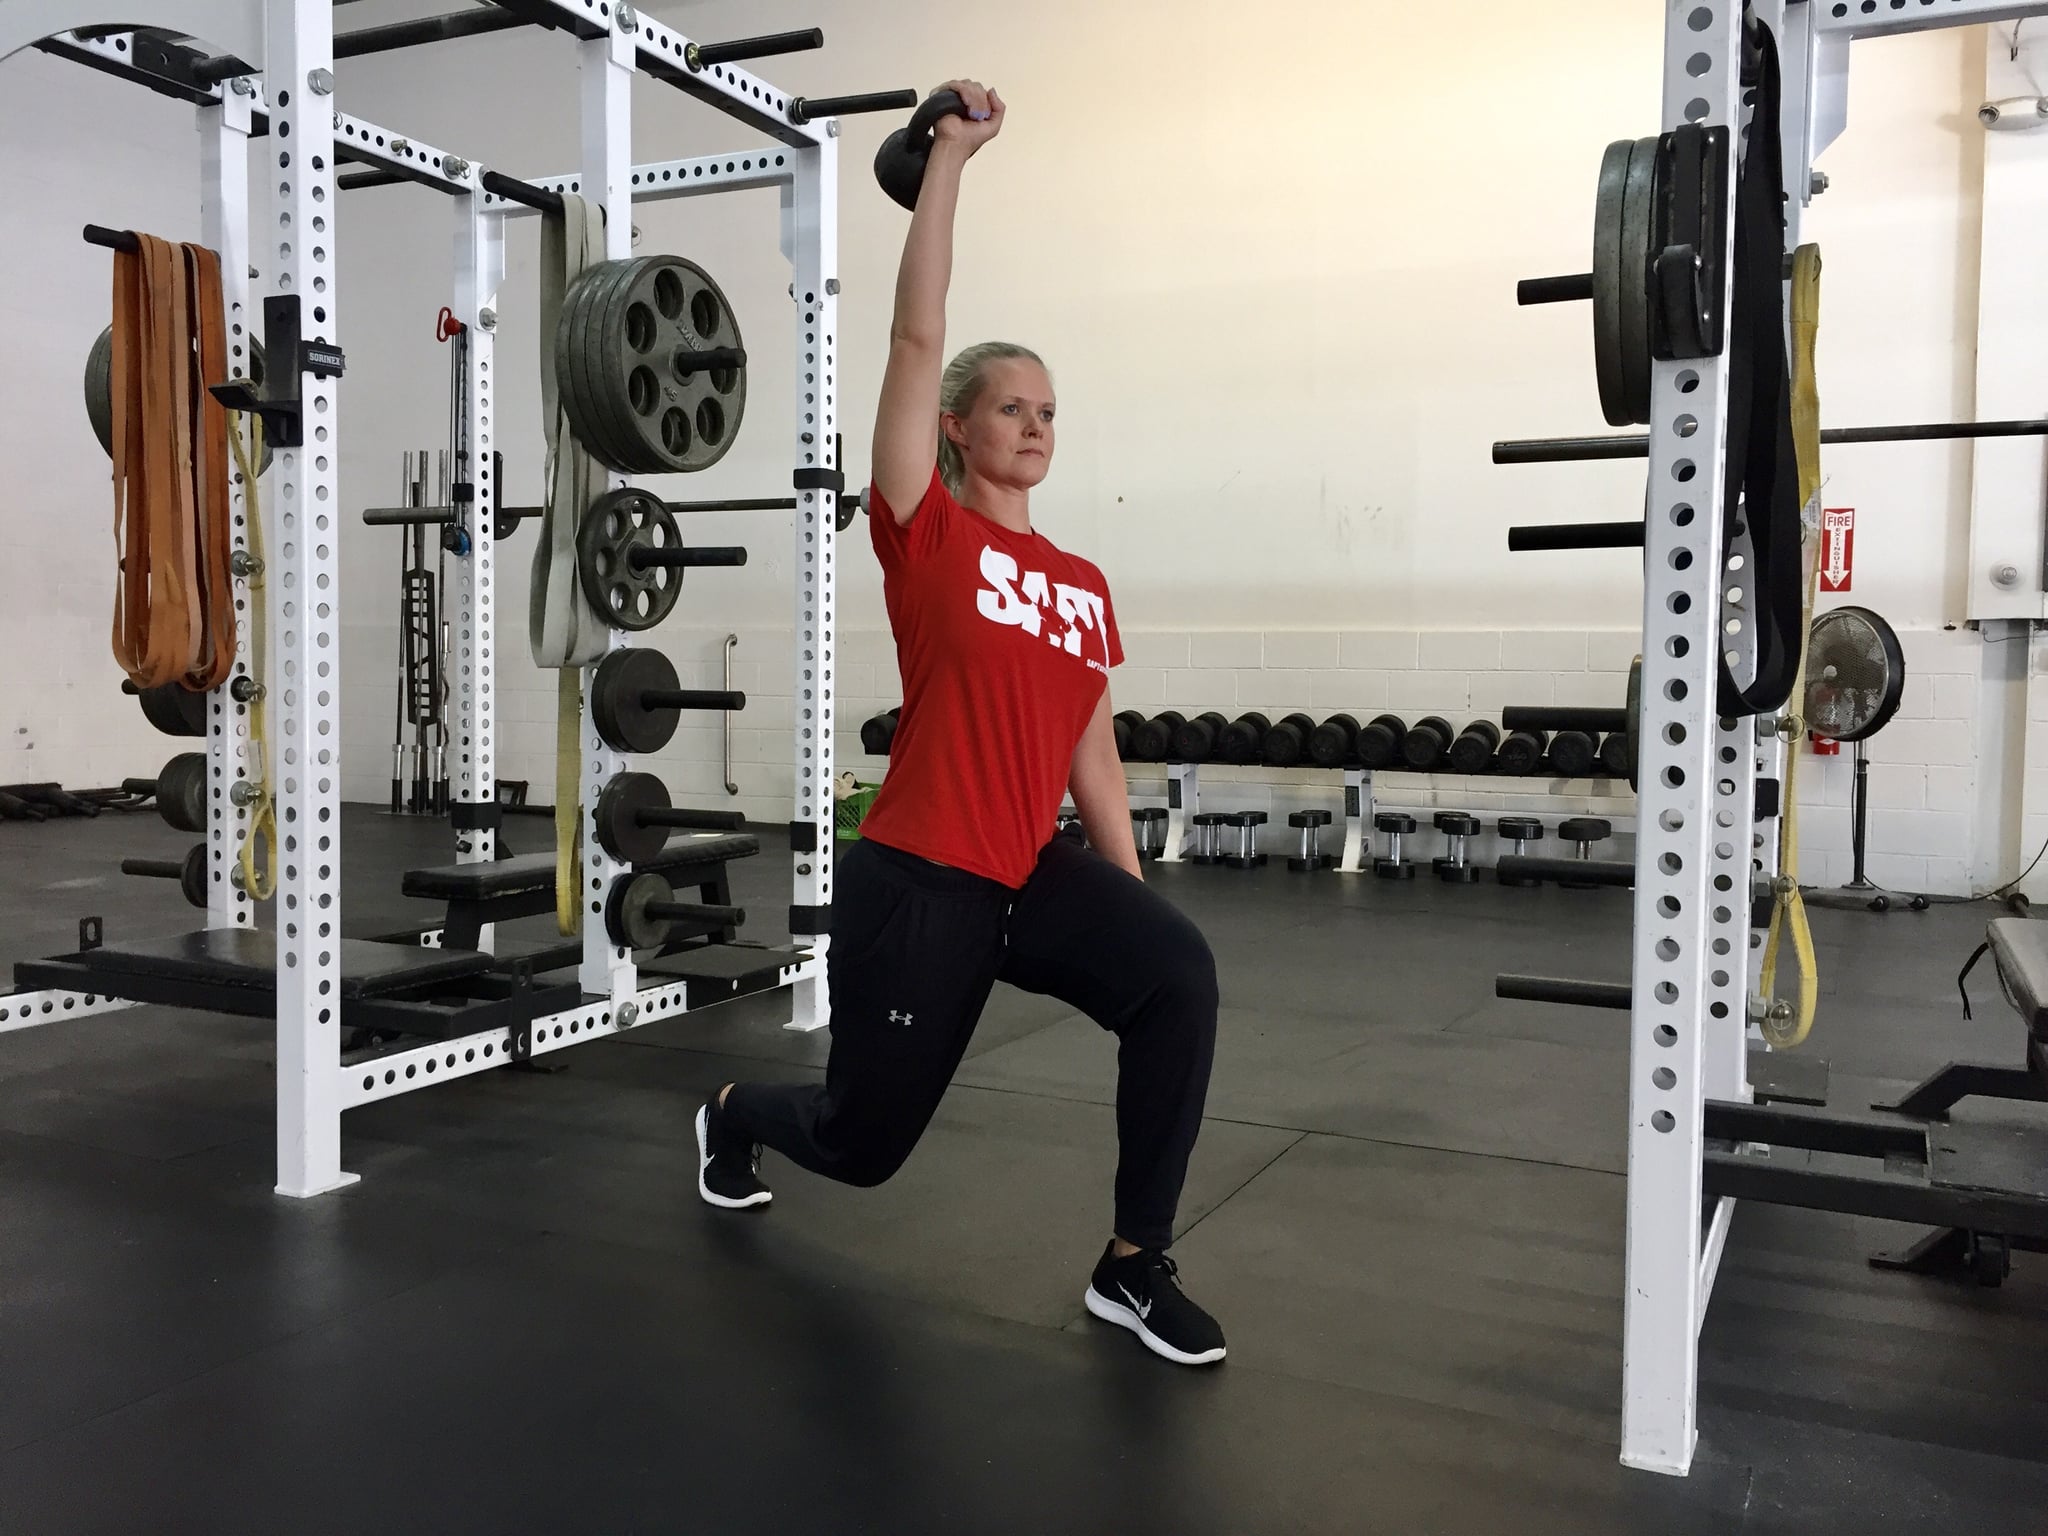 Split Squat Kettlebell Pass to Press 9 Kettlebell Moves to Burn Major Calories and Build Some Muscle | POPSUGAR Fitness Photo 8